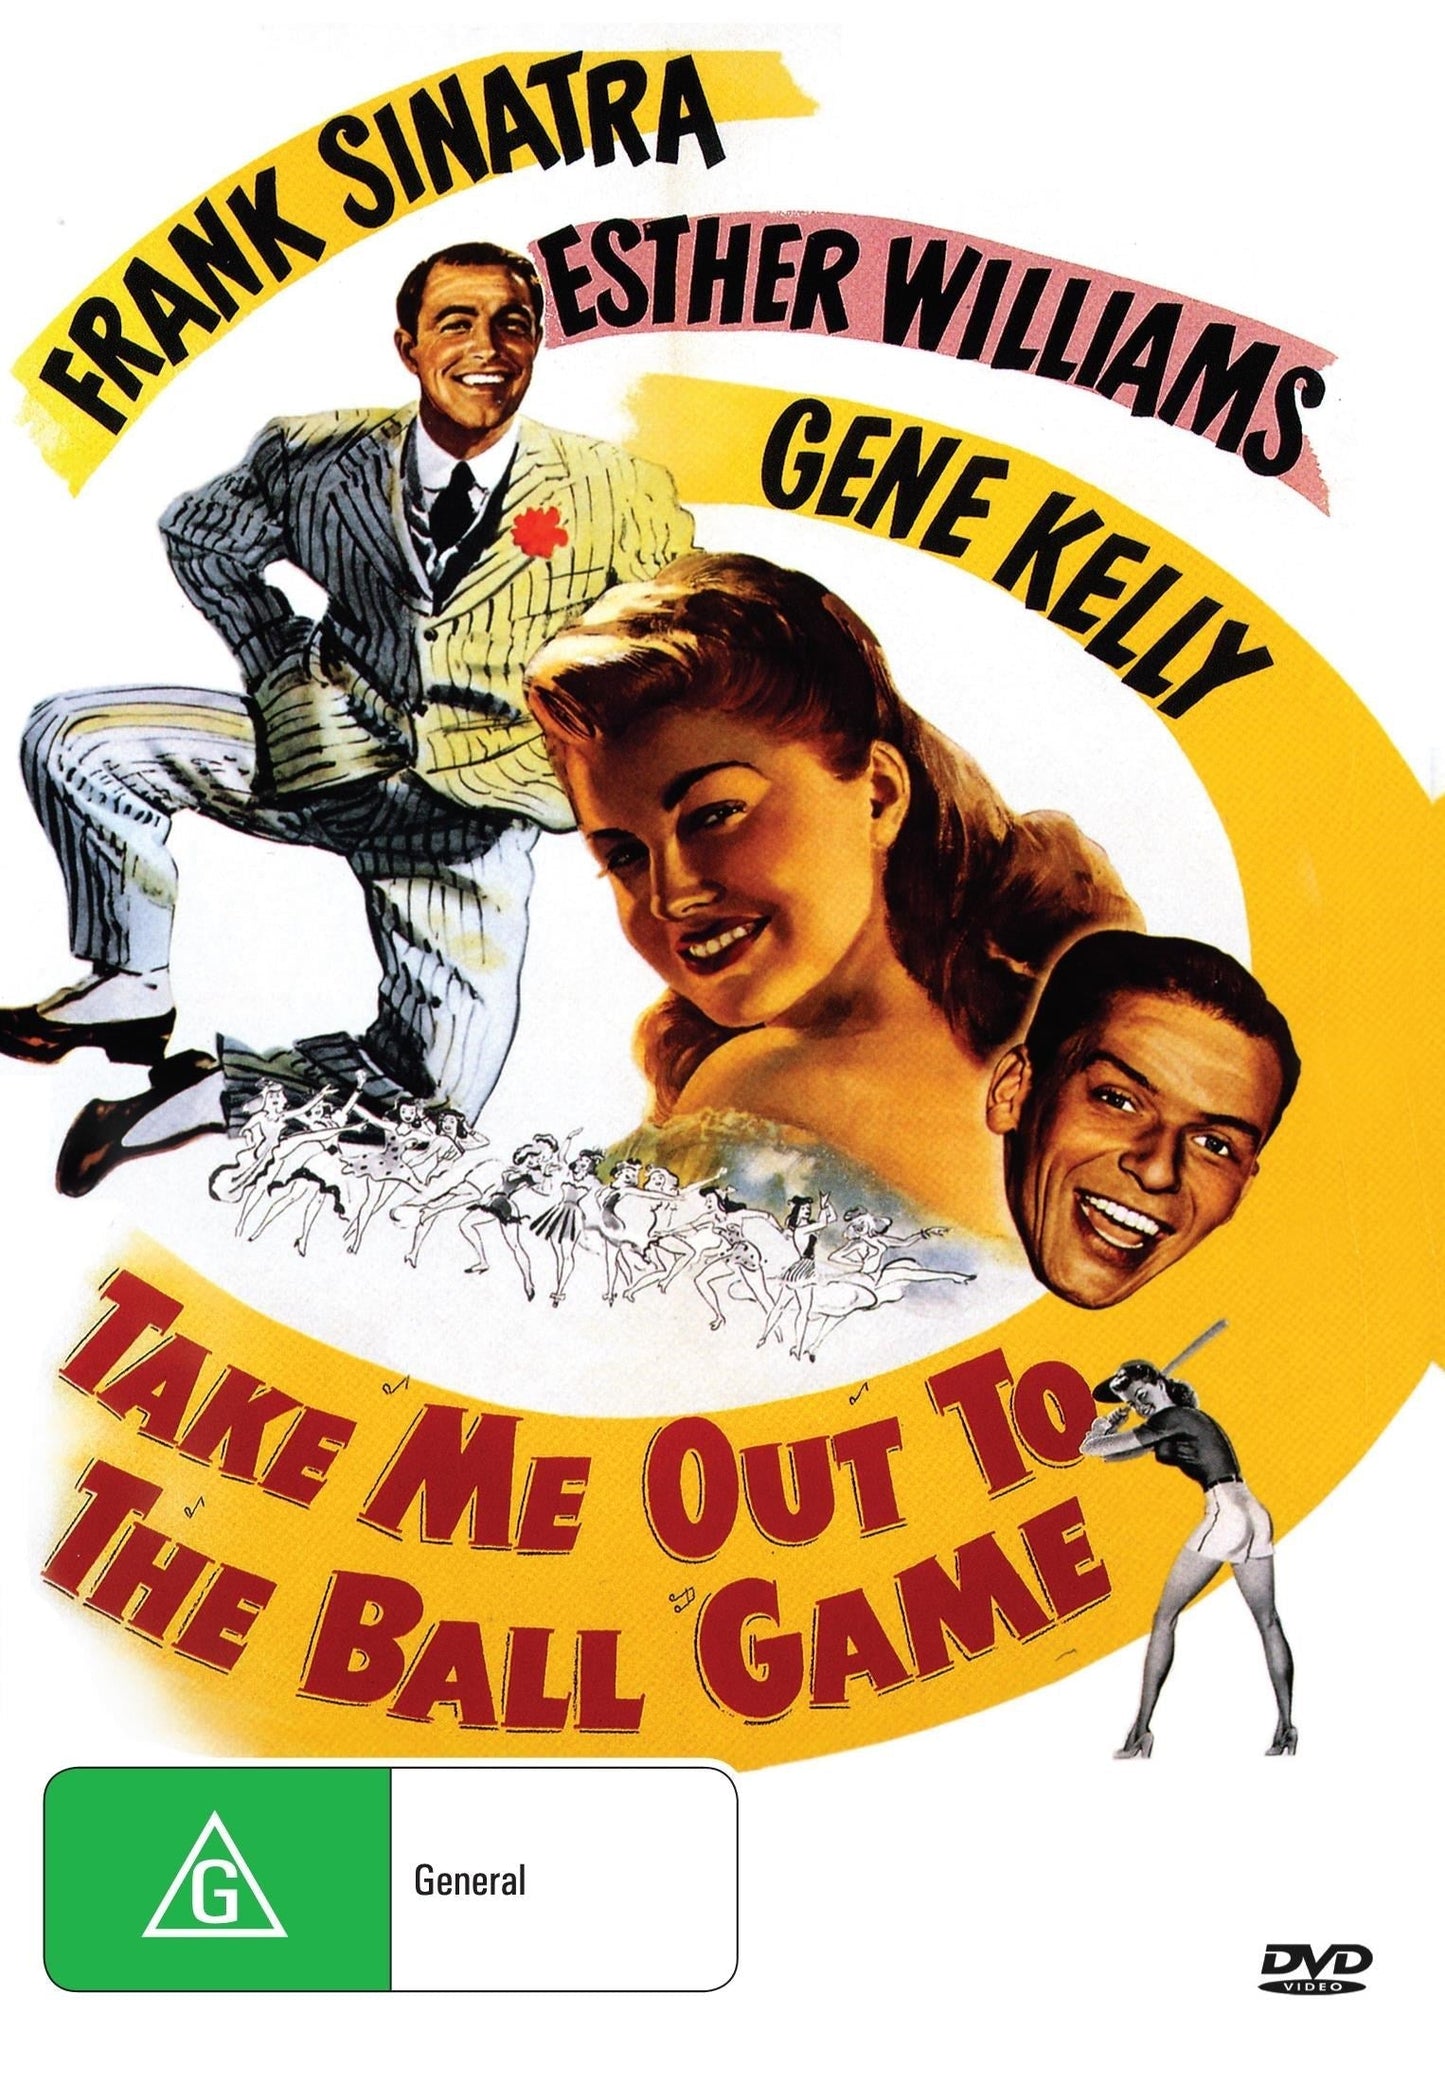 Take Me Out To The Ball Game rareandcollectibledvds